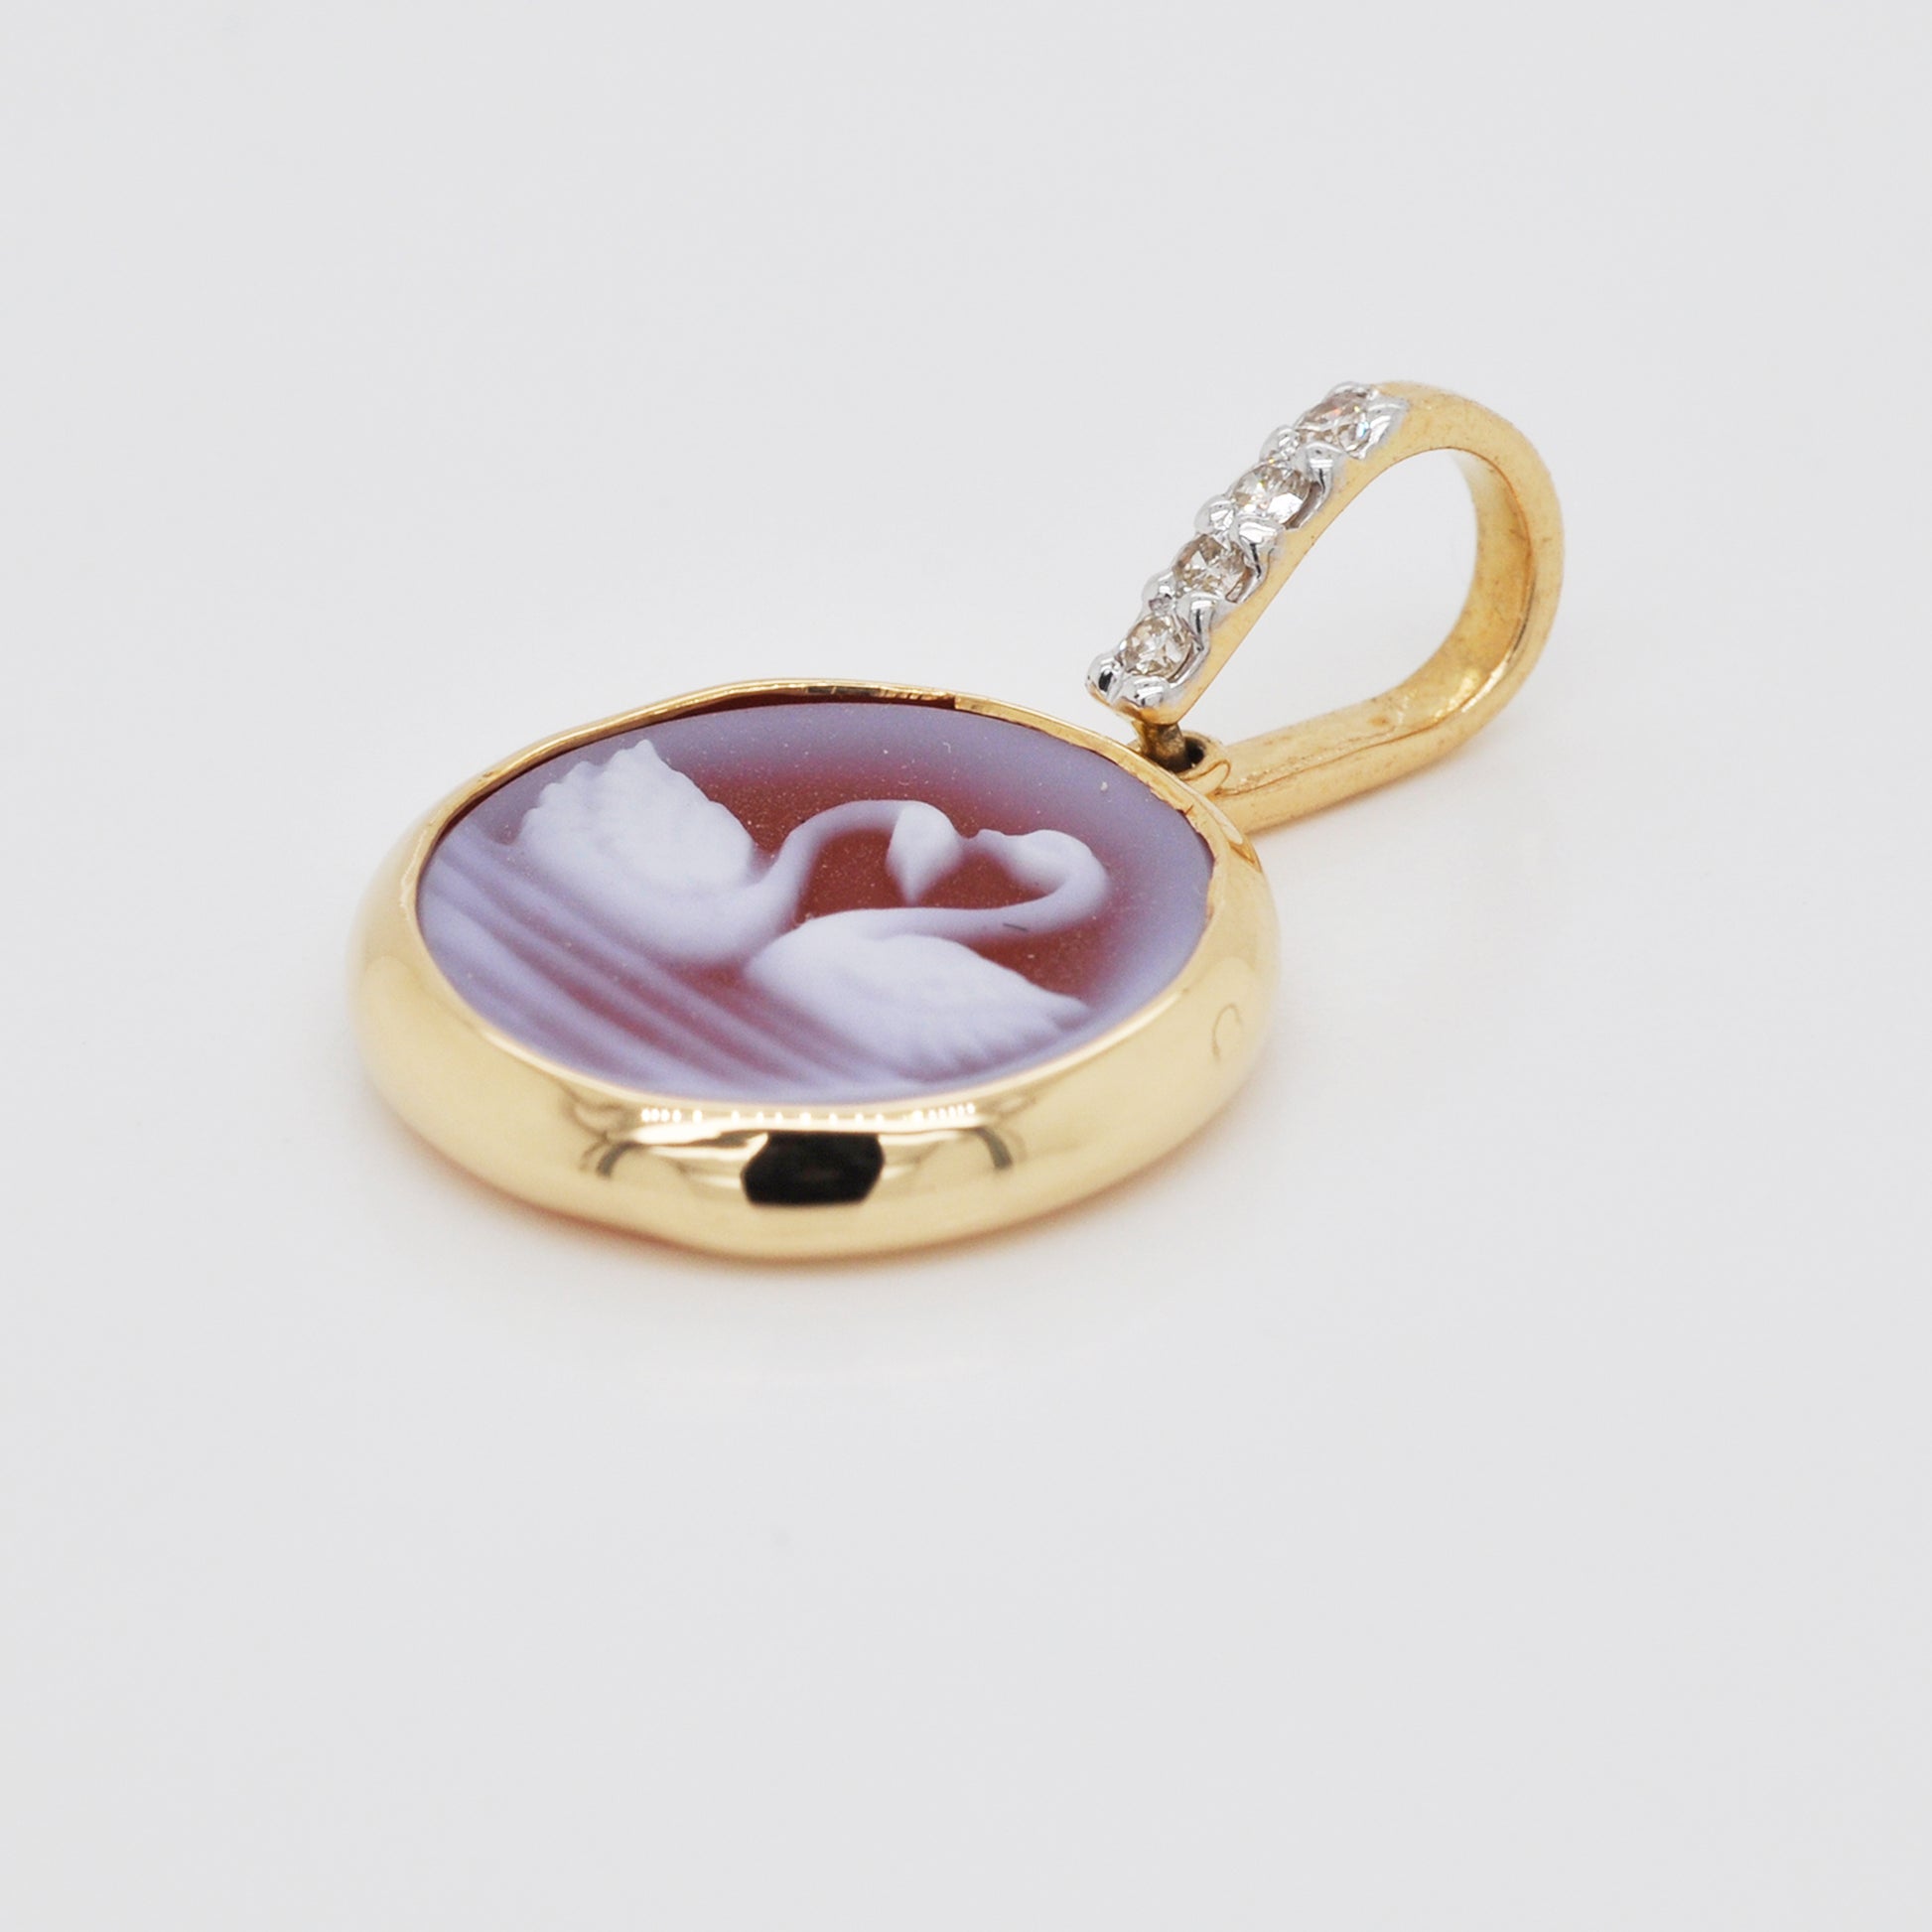 Natural agate cameo jewelry